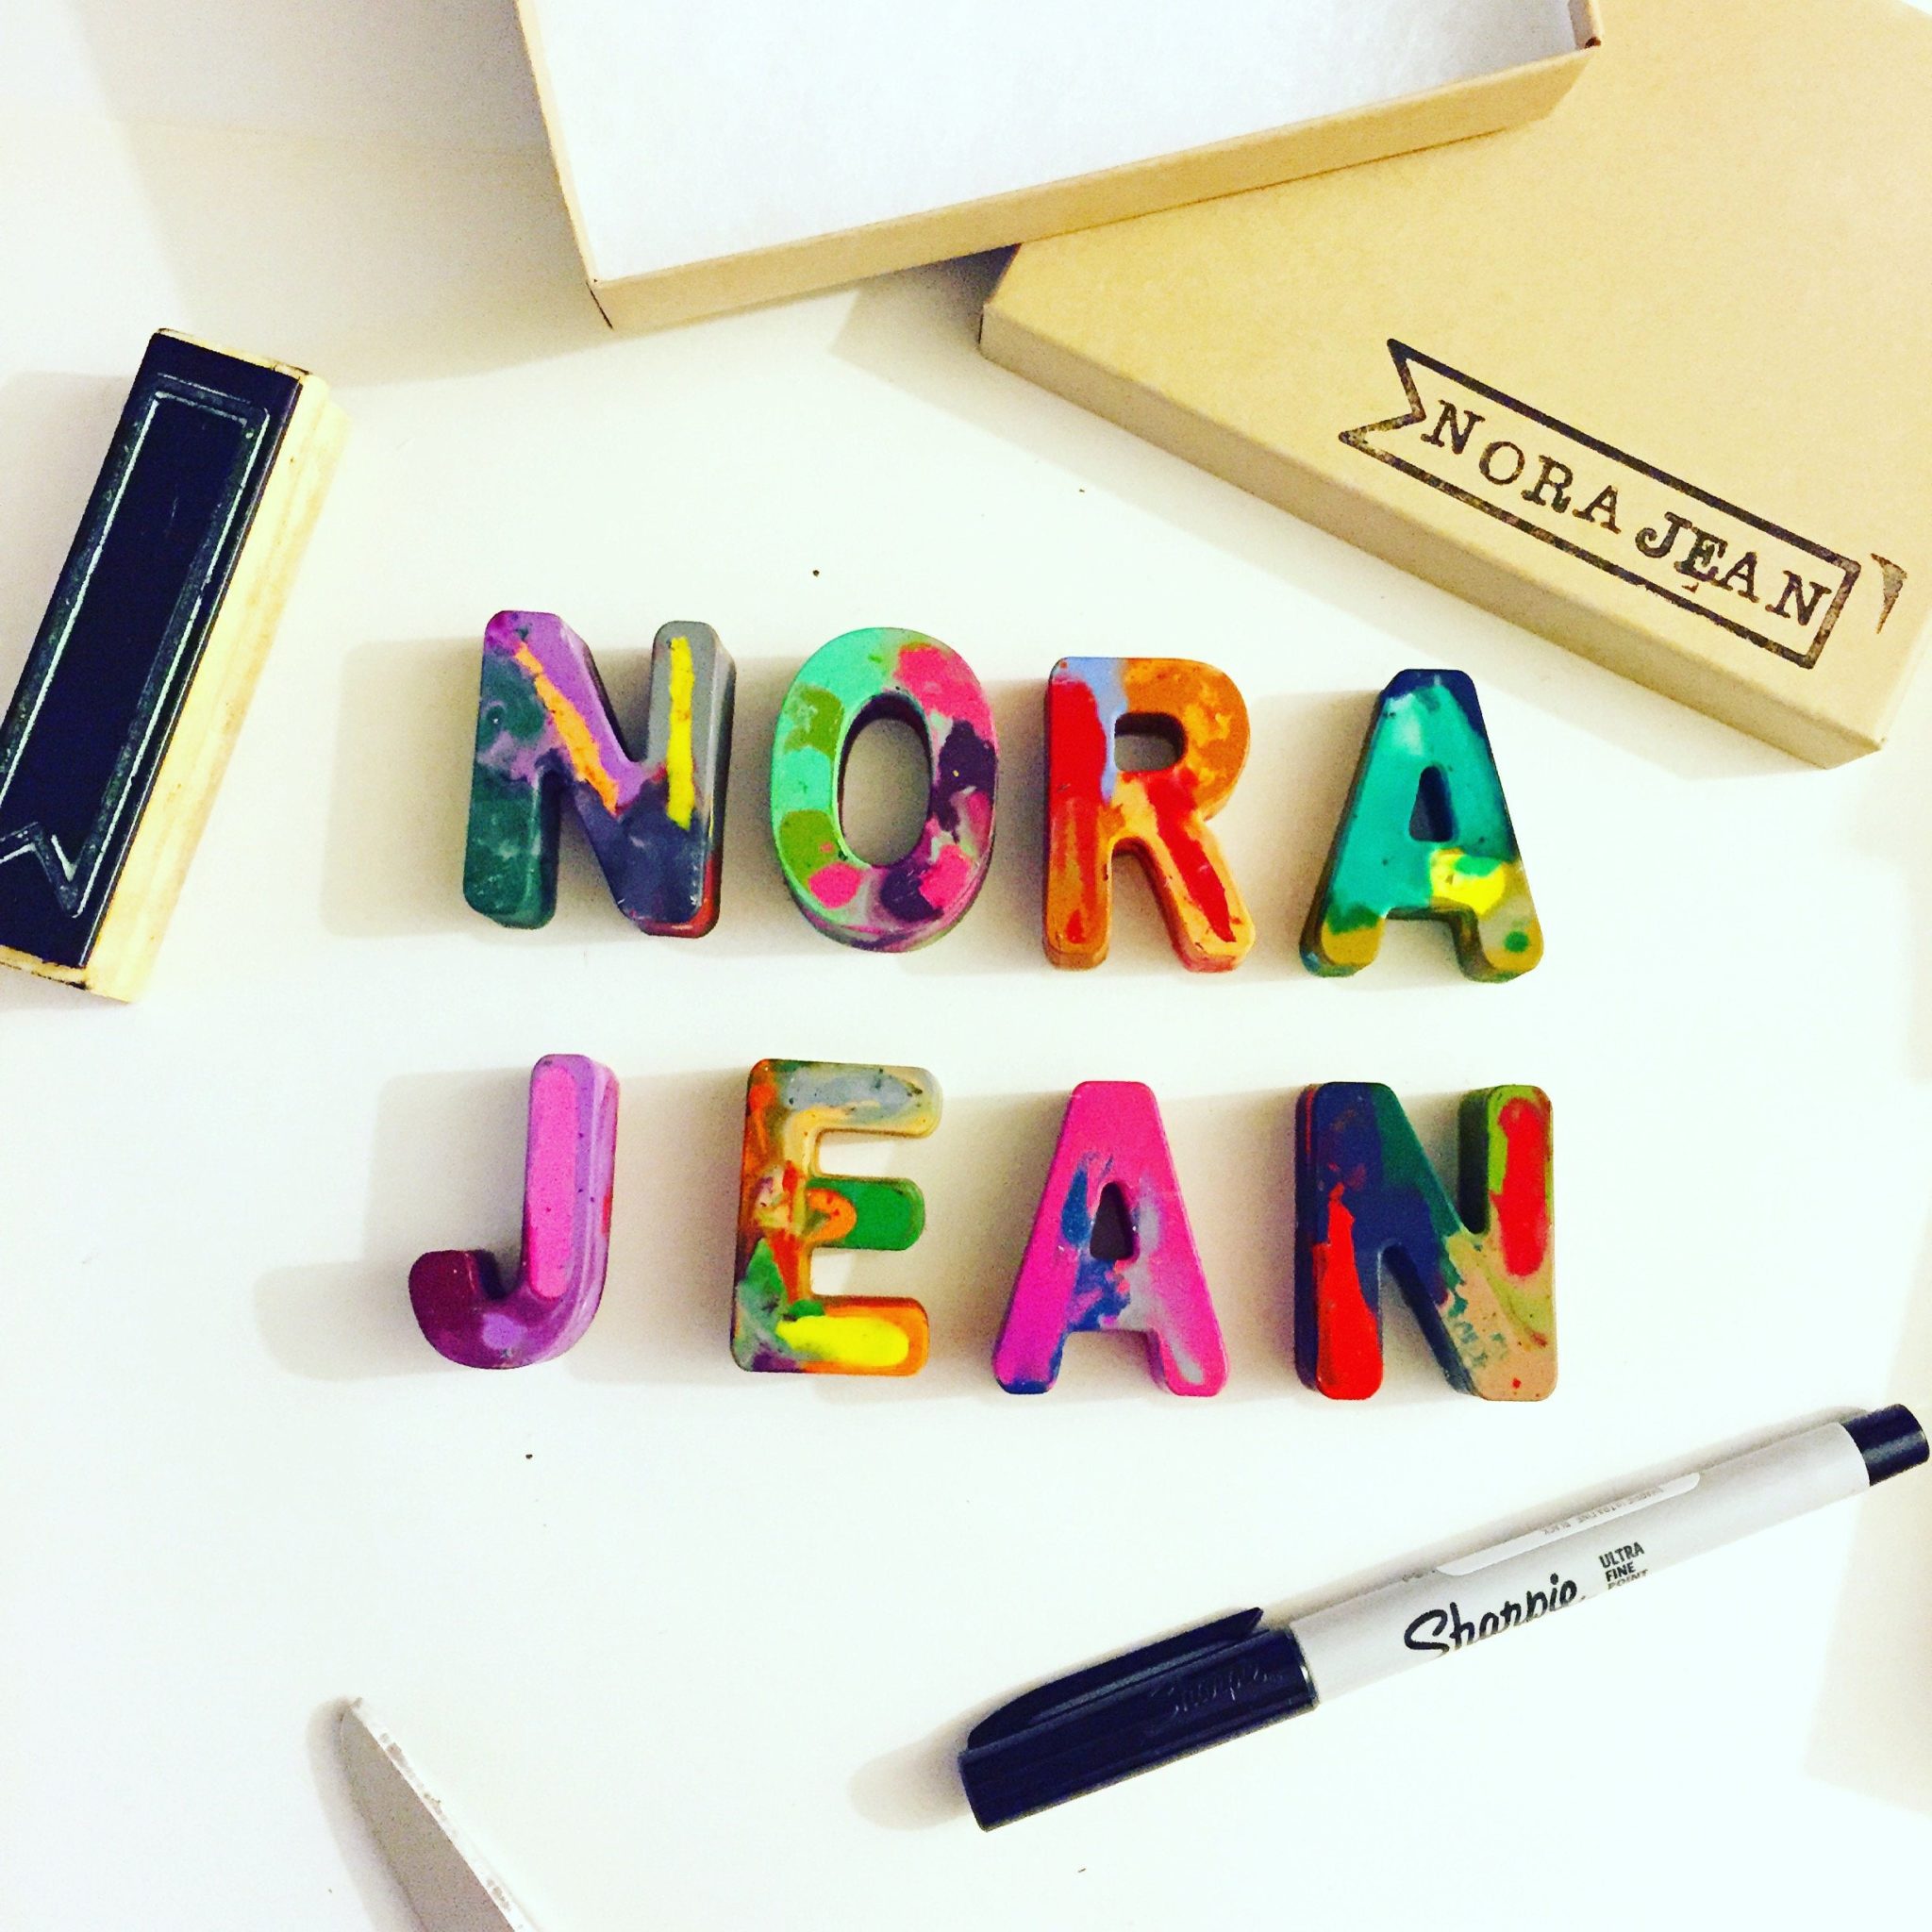 Colorful rainbow crayons in the shape of letters spelling out NORA JEAN.